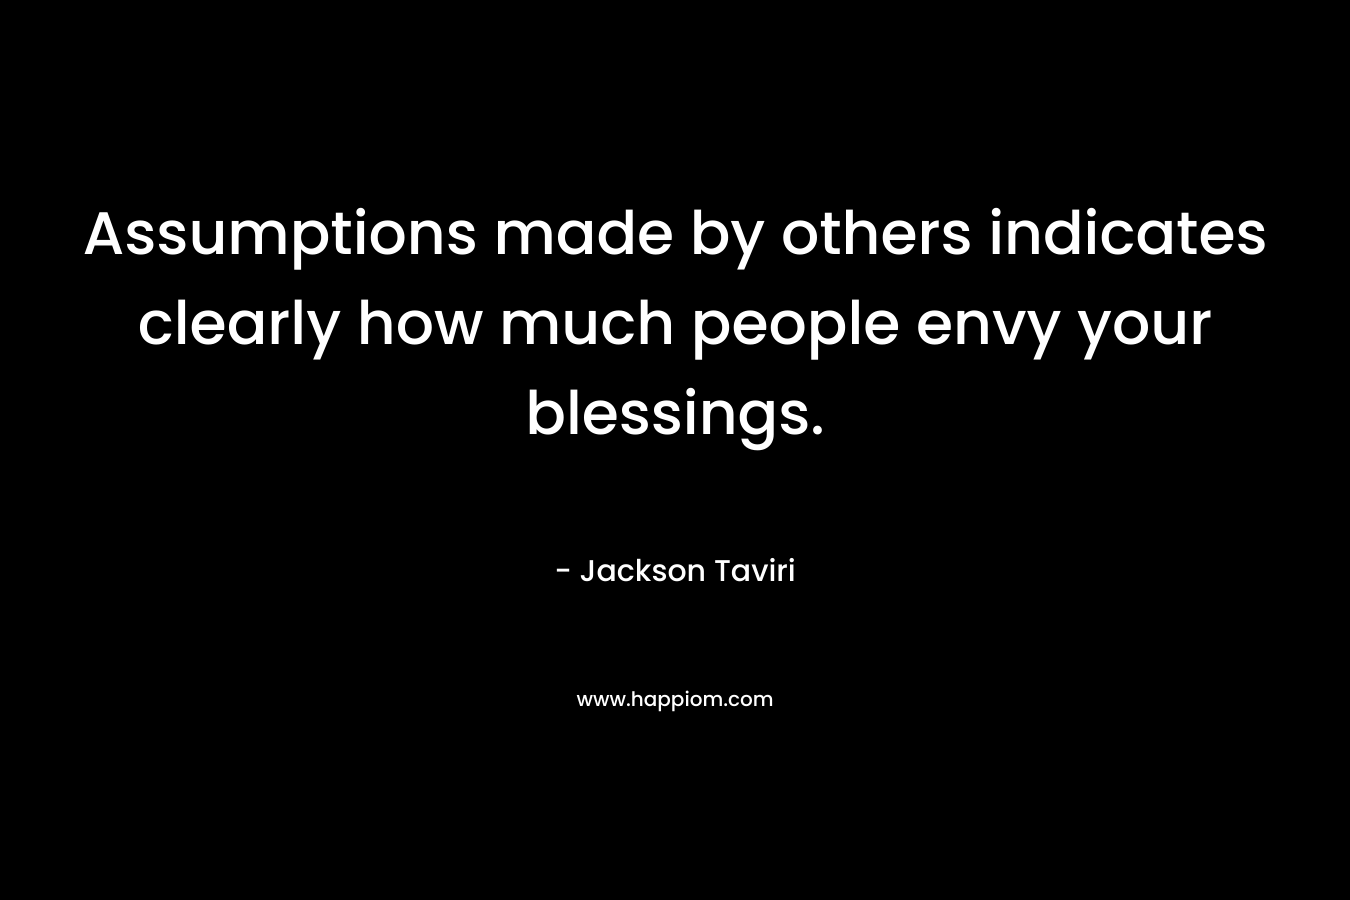 Assumptions made by others indicates clearly how much people envy your blessings.